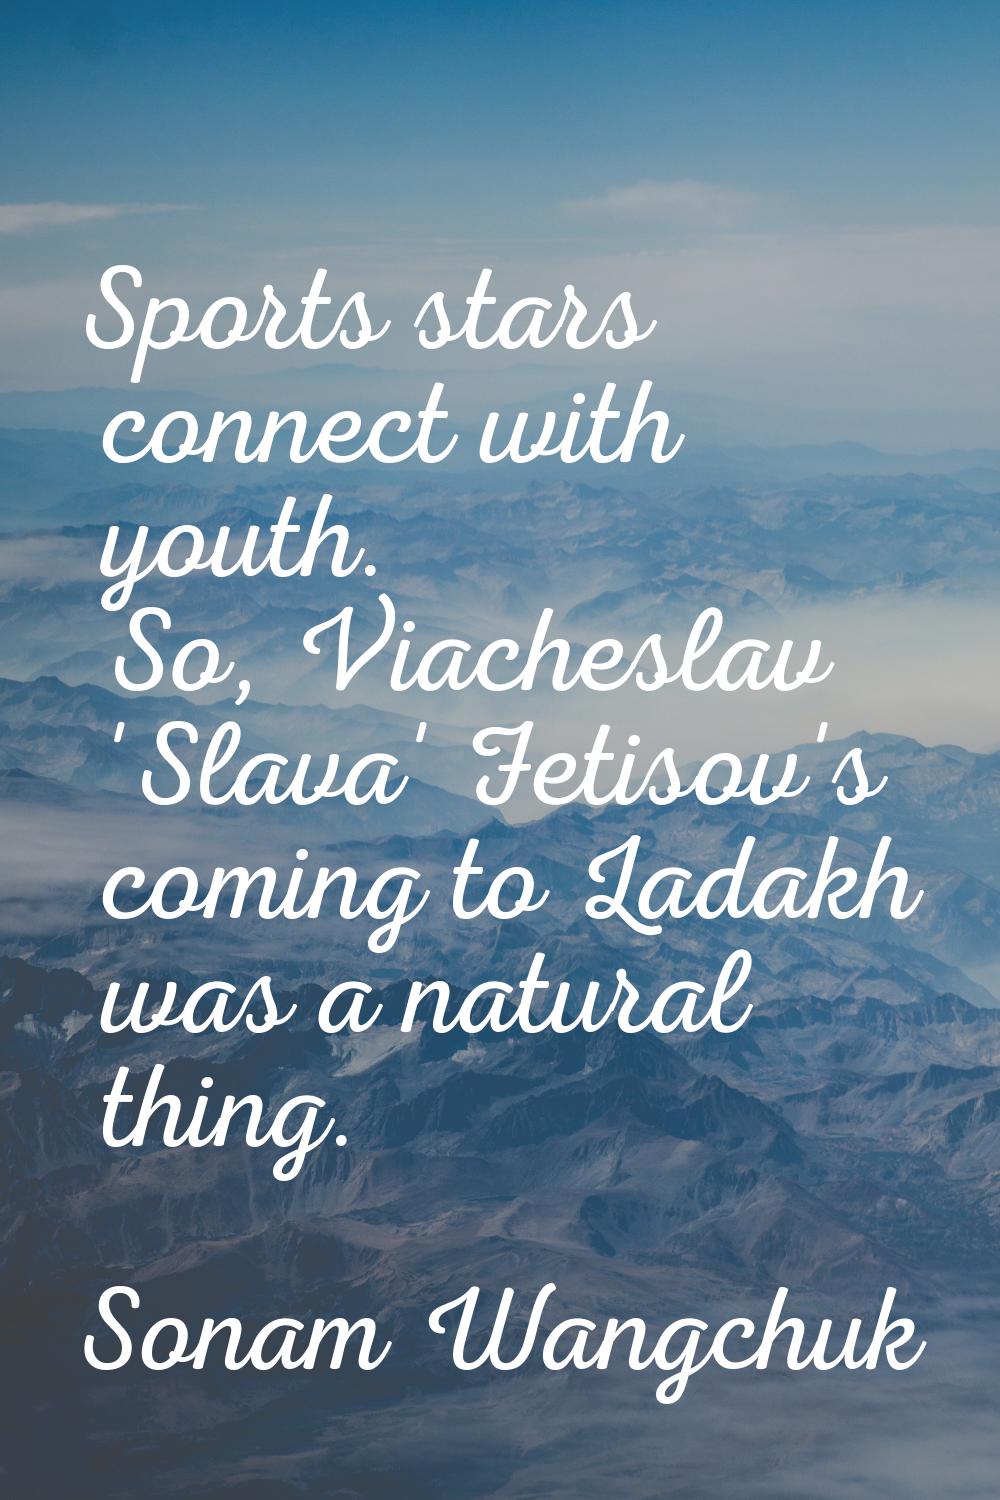 Sports stars connect with youth. So, Viacheslav 'Slava' Fetisov's coming to Ladakh was a natural th